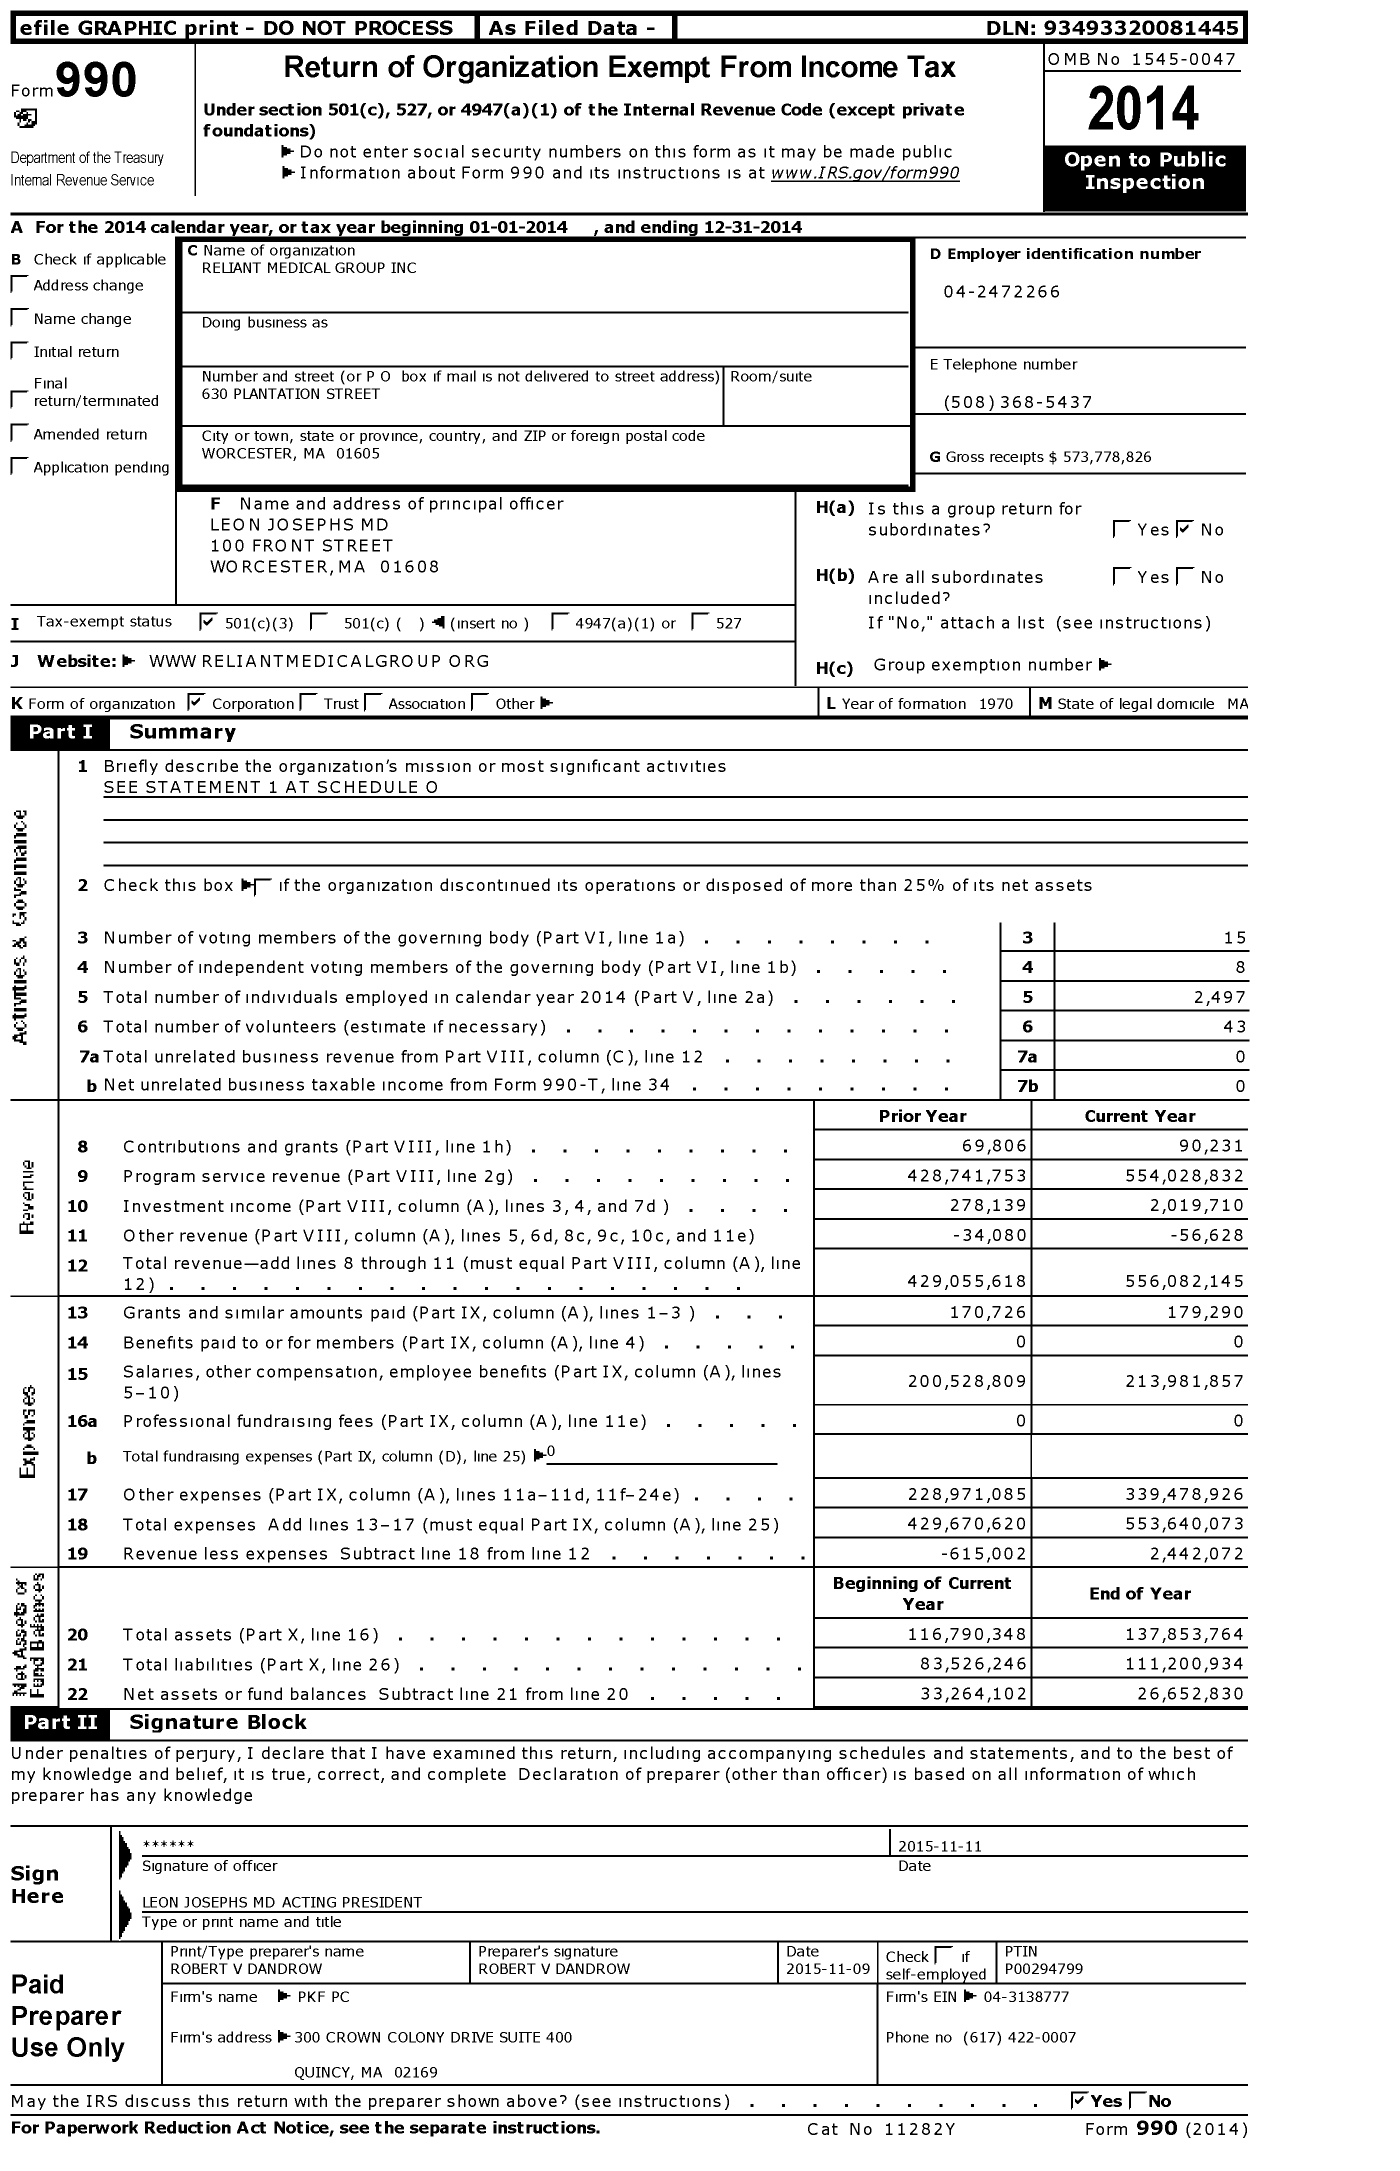 Image of first page of 2014 Form 990 for Reliant Medical Group